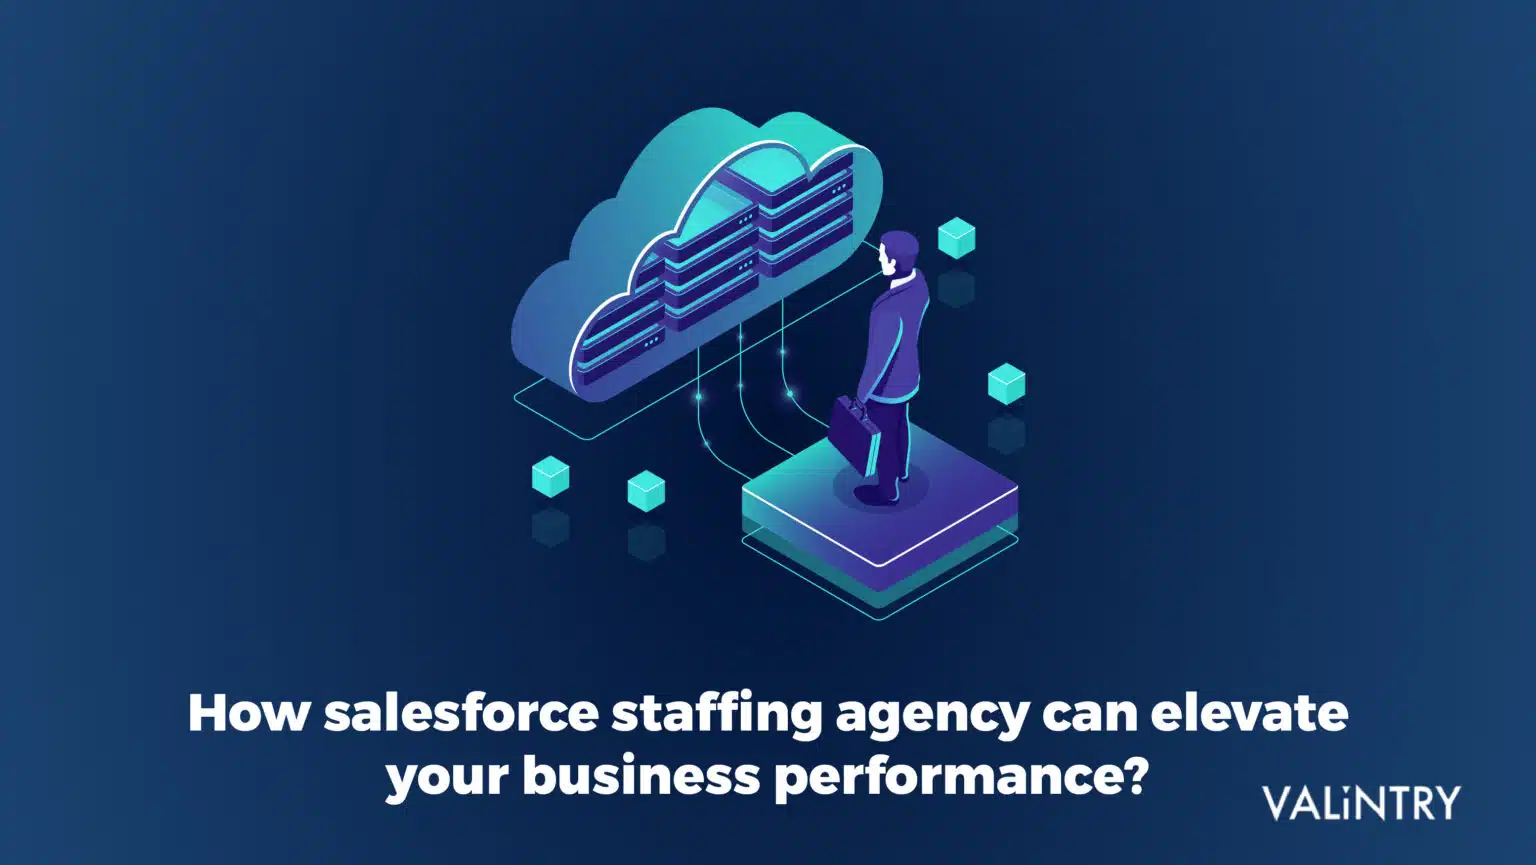 Salesforce Recruitment Agencies: Finding the Right Talent for Your Salesforce Team